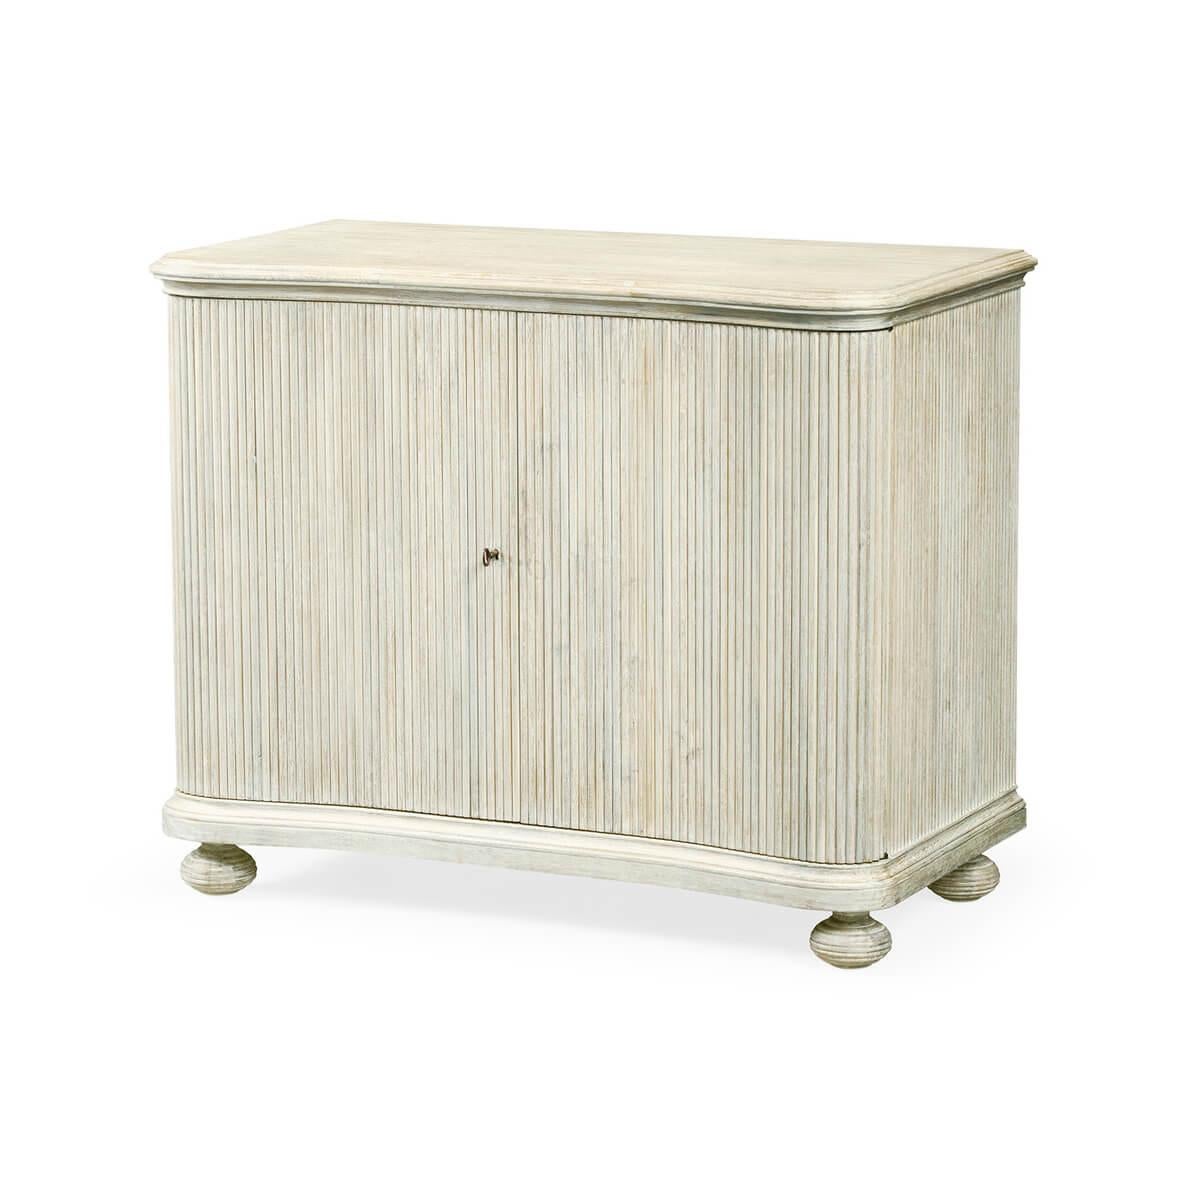 A modern white washed acacia cabinet with reeded sides, a molded edge top, painted interior with adjustable shelves and raised on bun feet.

Dimensions: 42